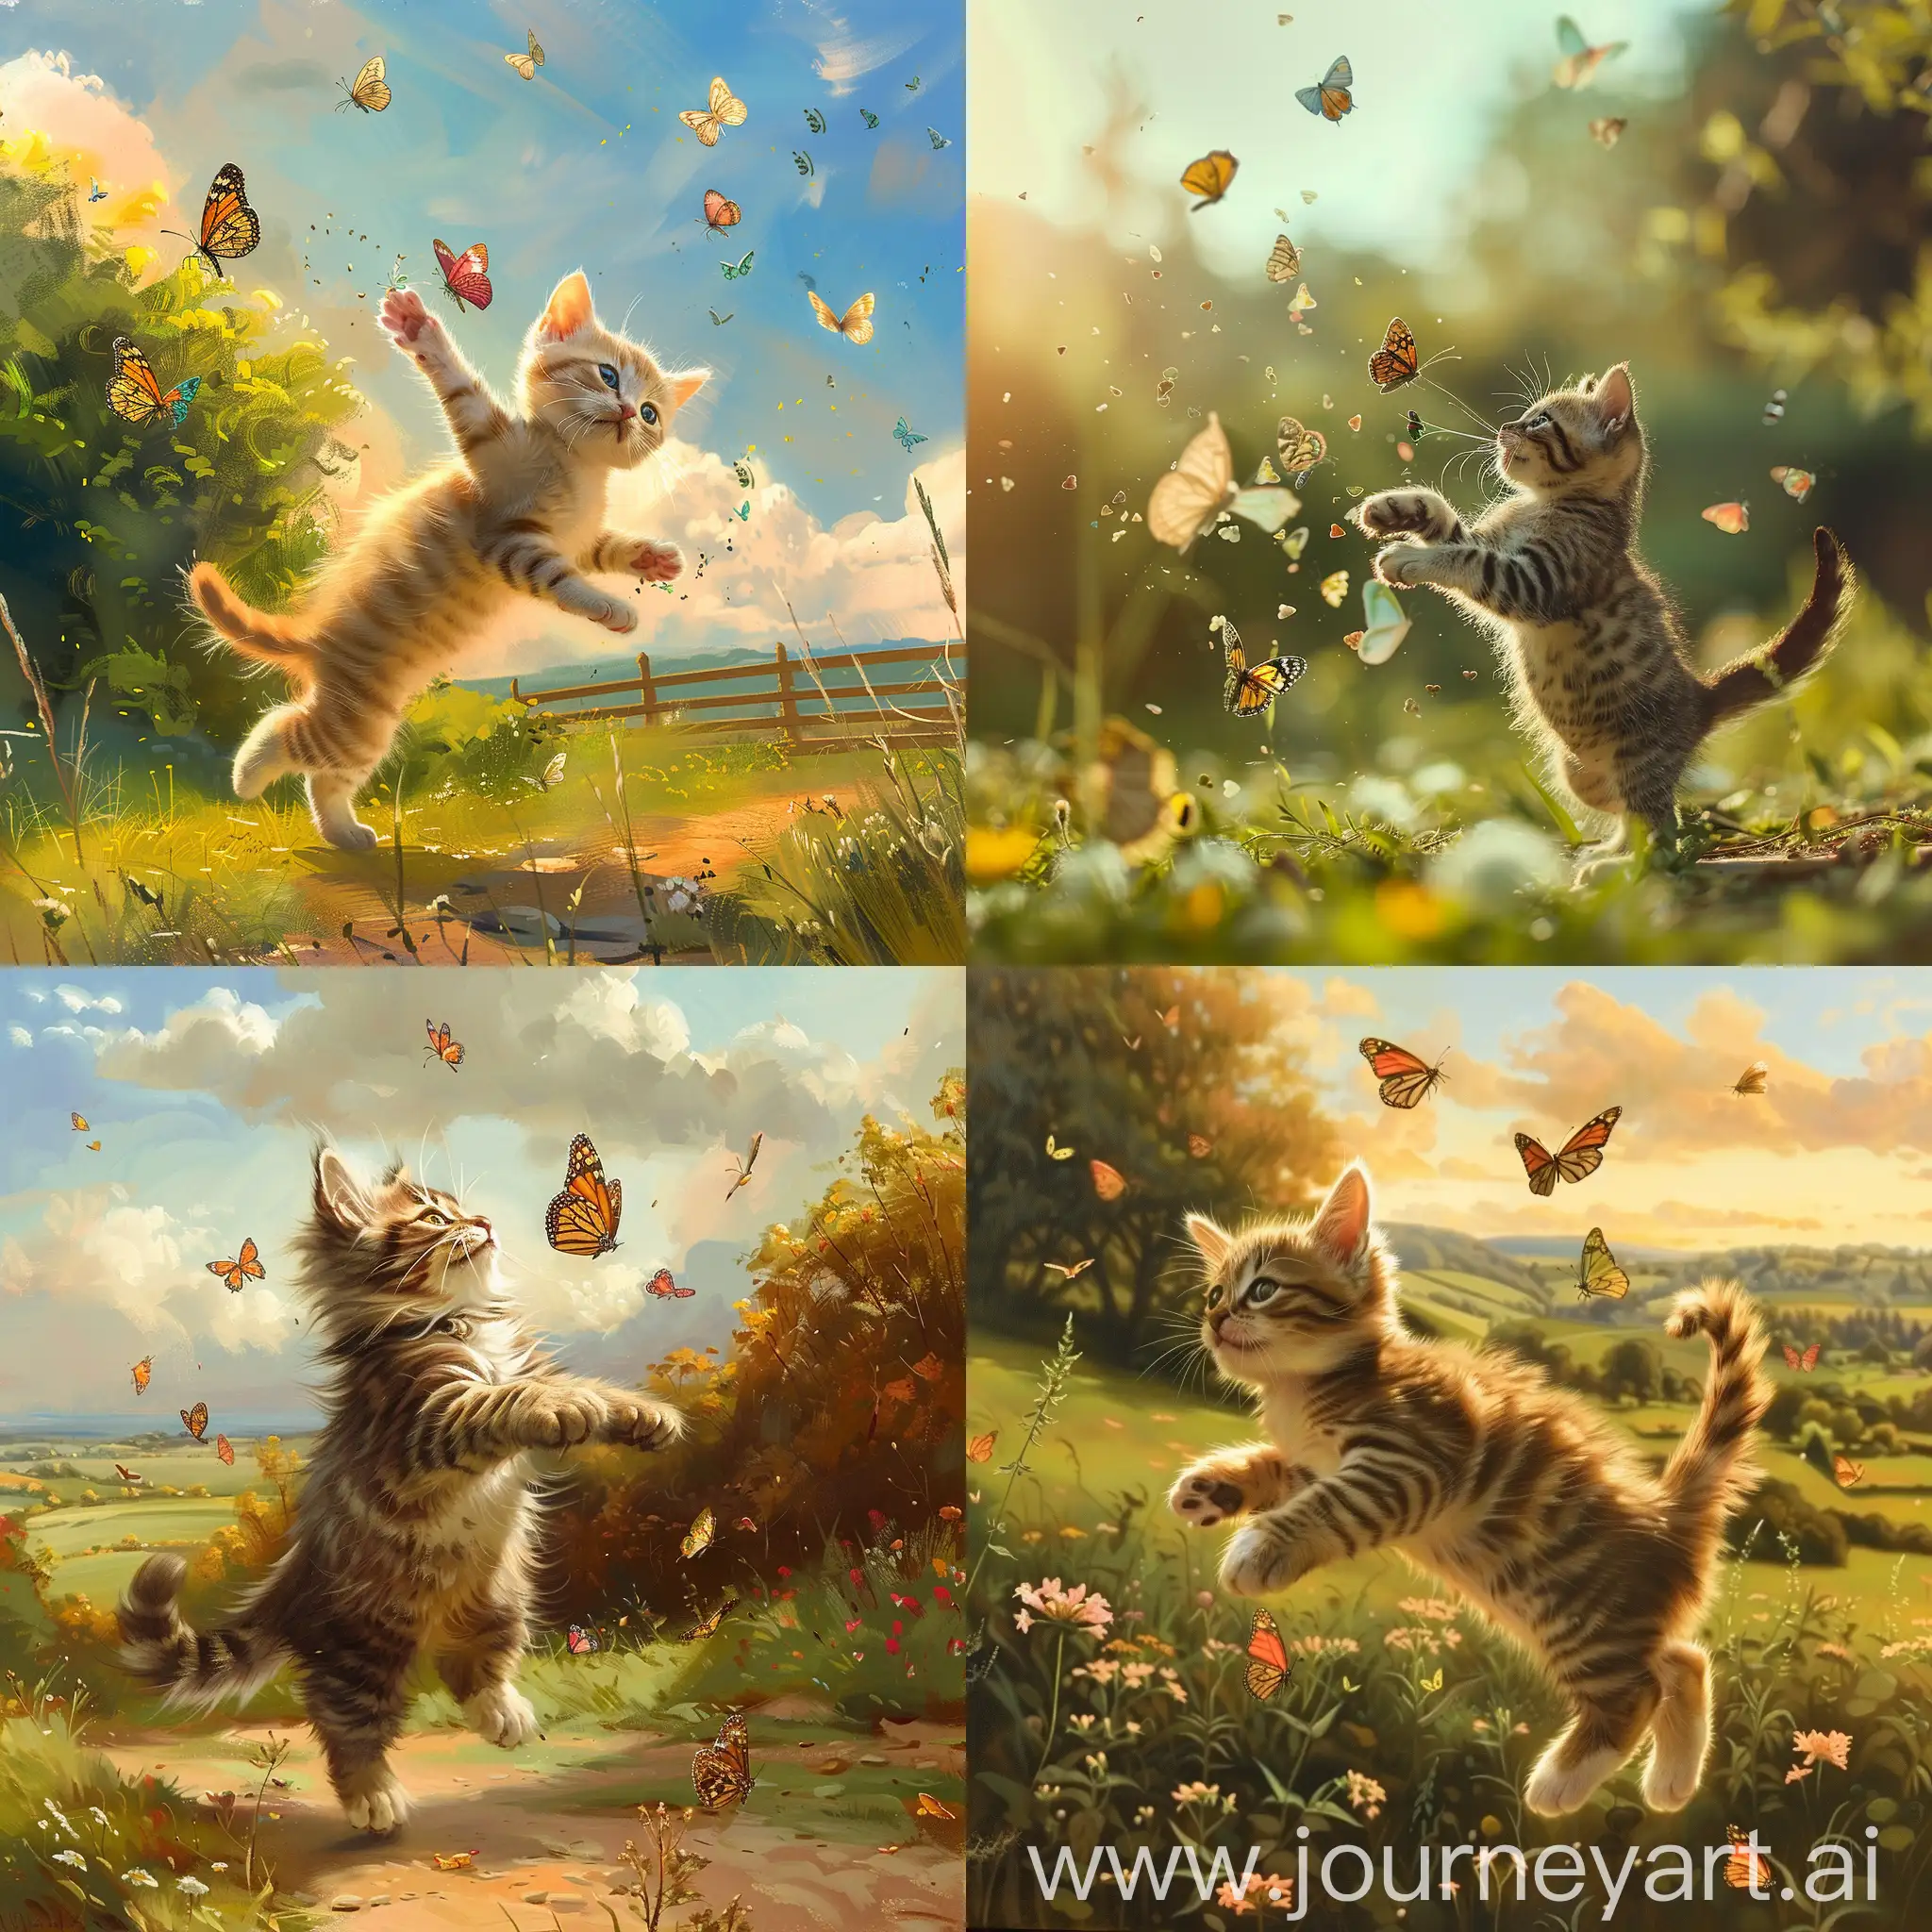 Playful-Kitten-Chasing-Butterflies-in-Scenic-Countryside